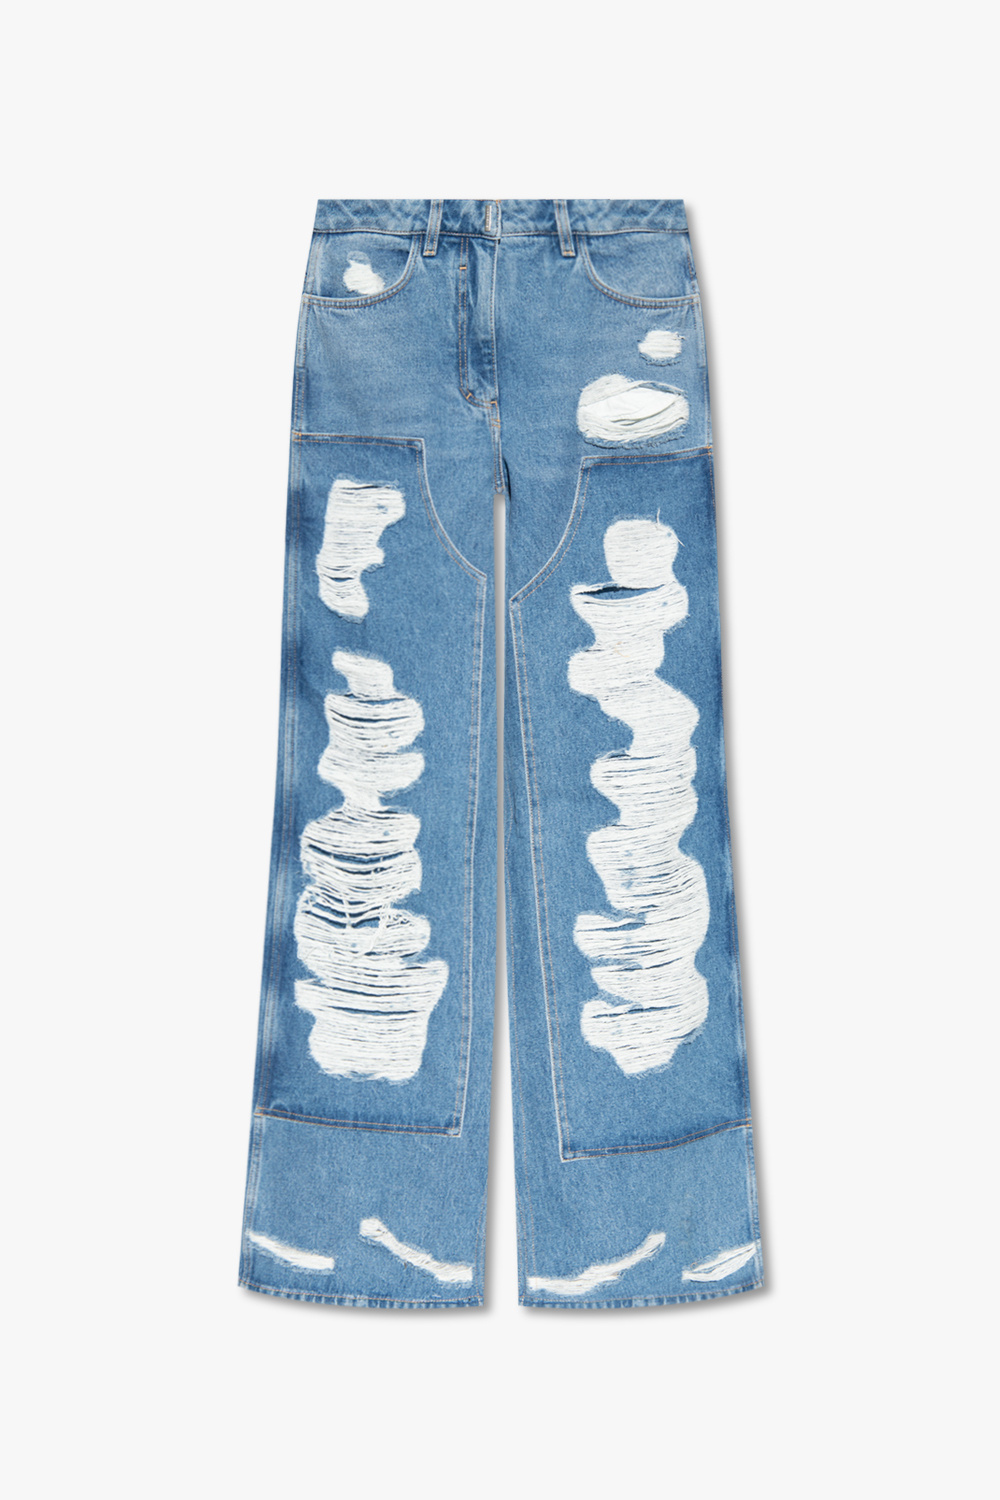 givenchy logo-strap Distressed jeans